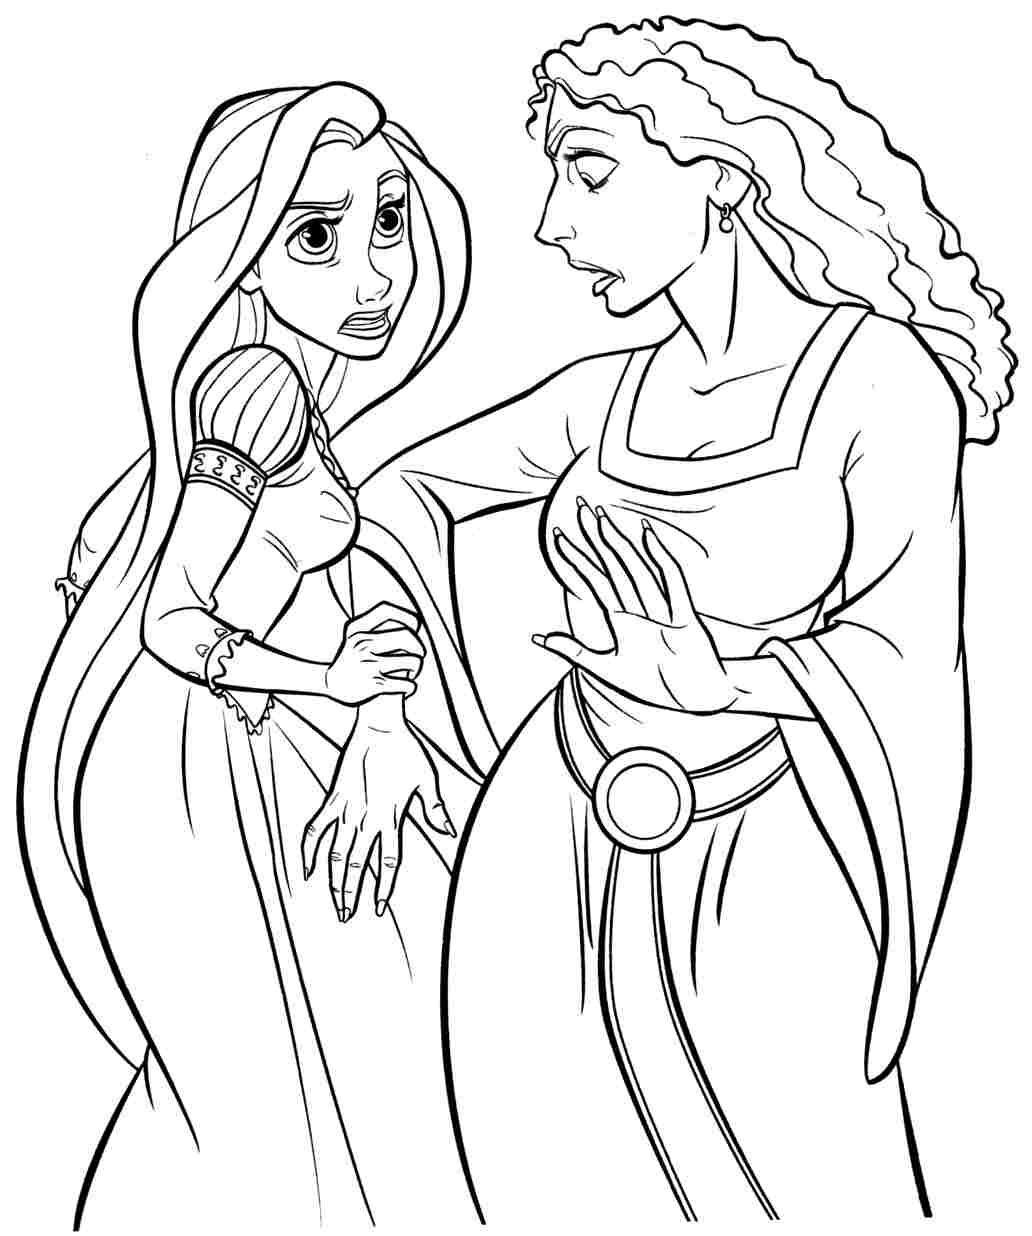 Rapunzel coloring pages to download and print for free